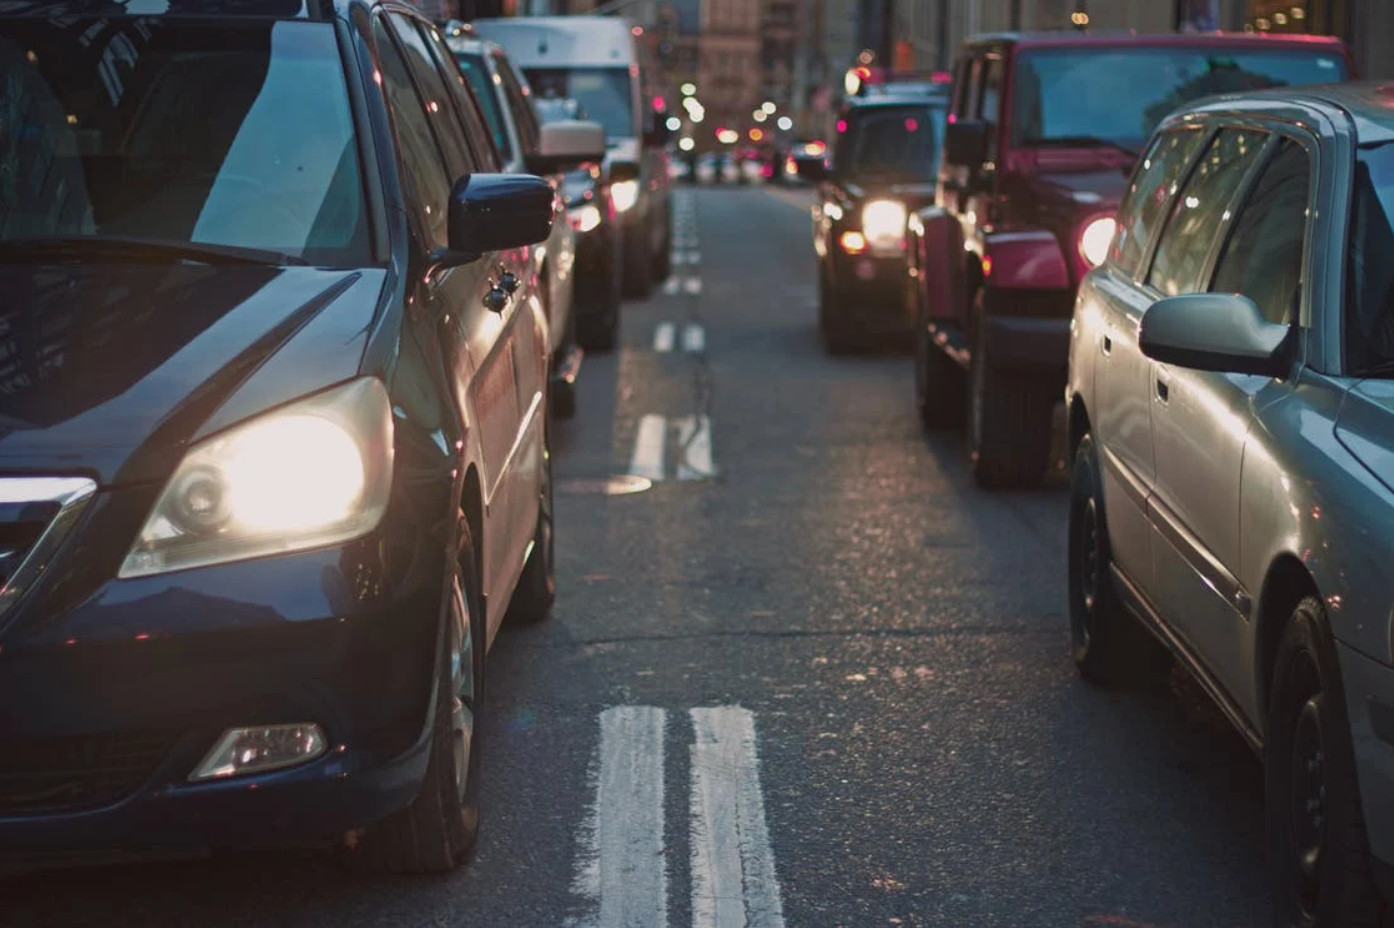 Cars in traffic; image by Life of Pix, via Pexels.com.